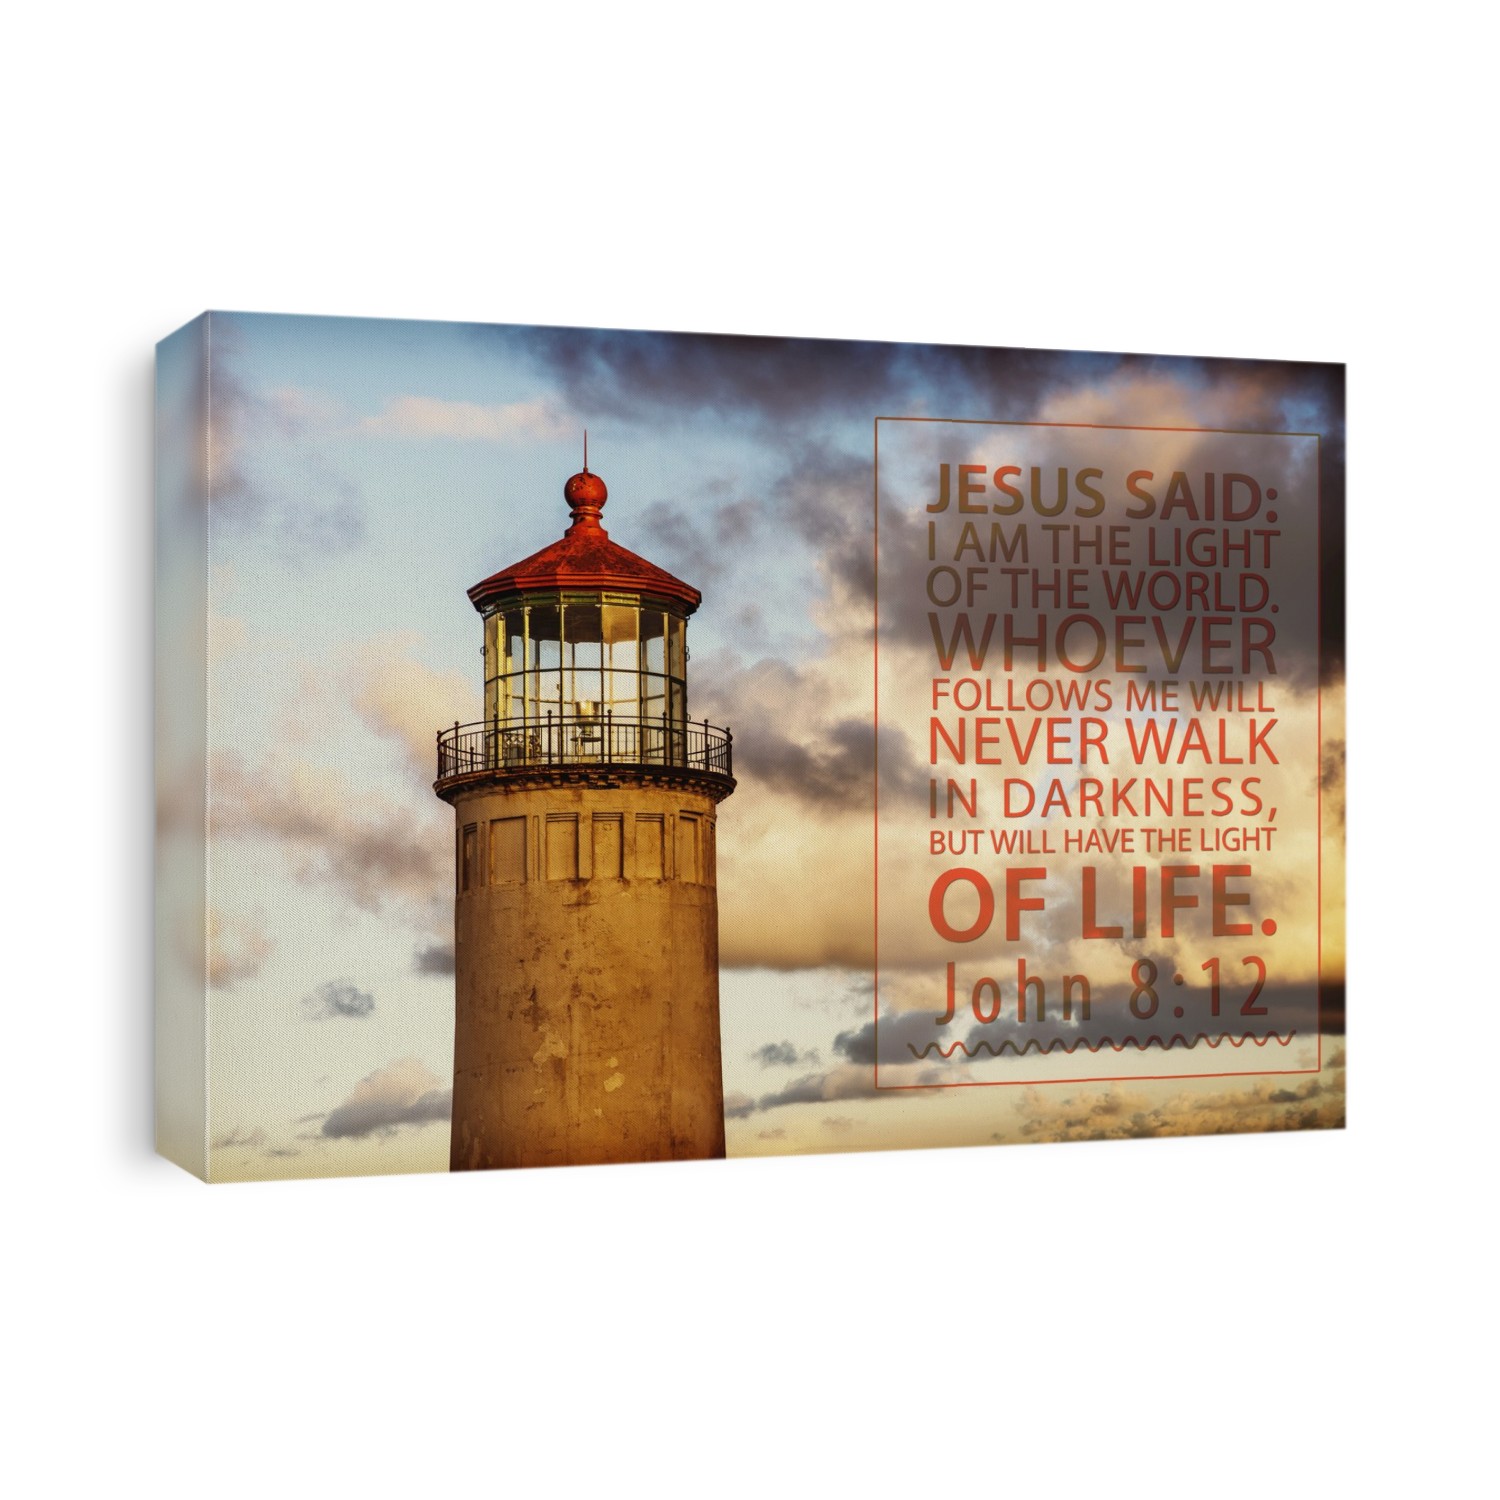 Image Of A Lighthouse Under A Sky Of Glowing Clouds And A Scripture From John 8:12